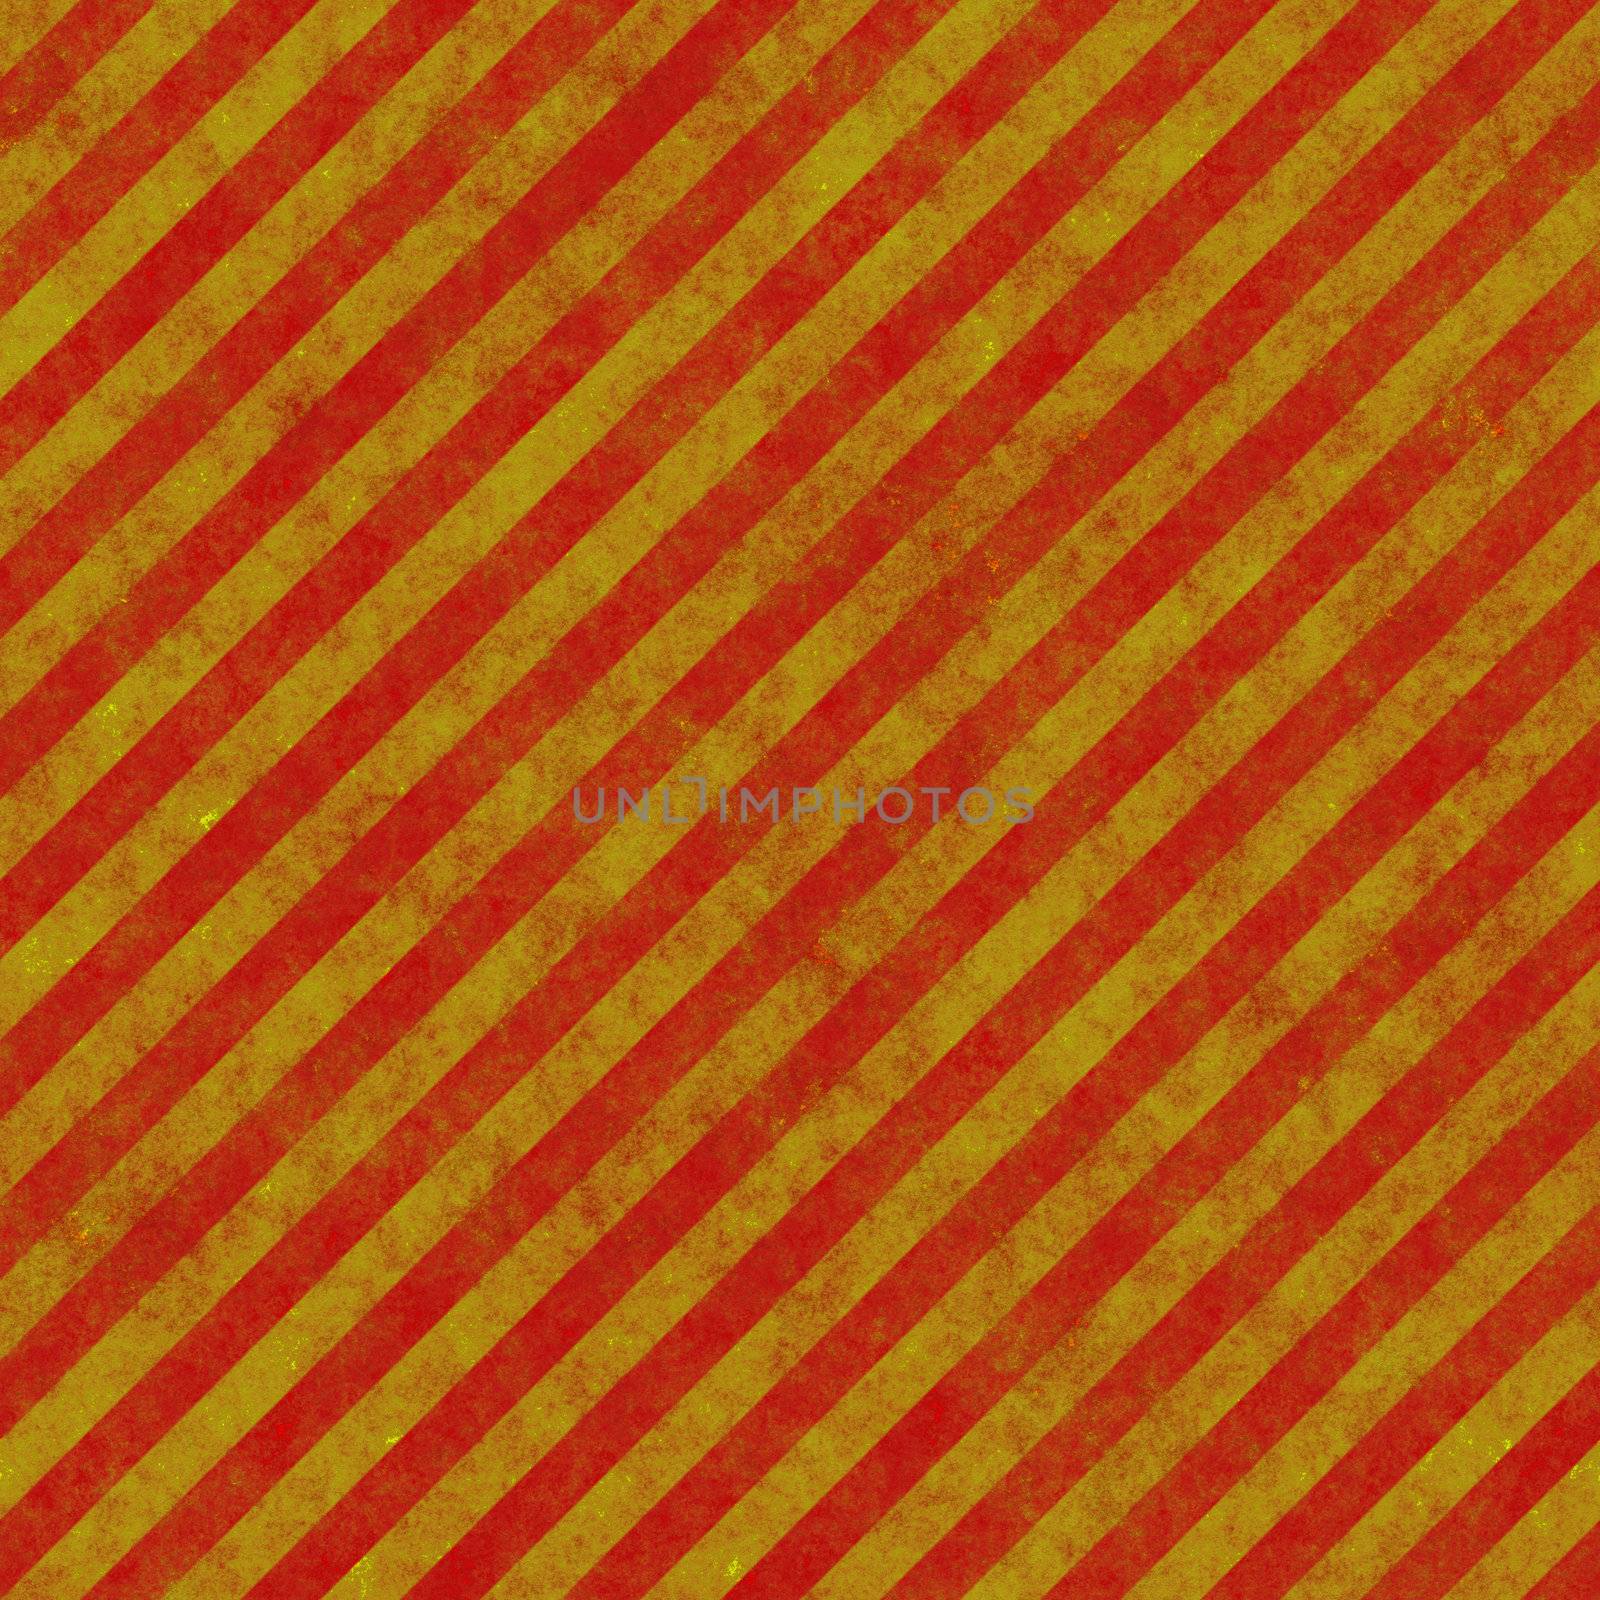 diagonal red and yellow warning / hazard stripes background, will tile seamlessly as a pattern

